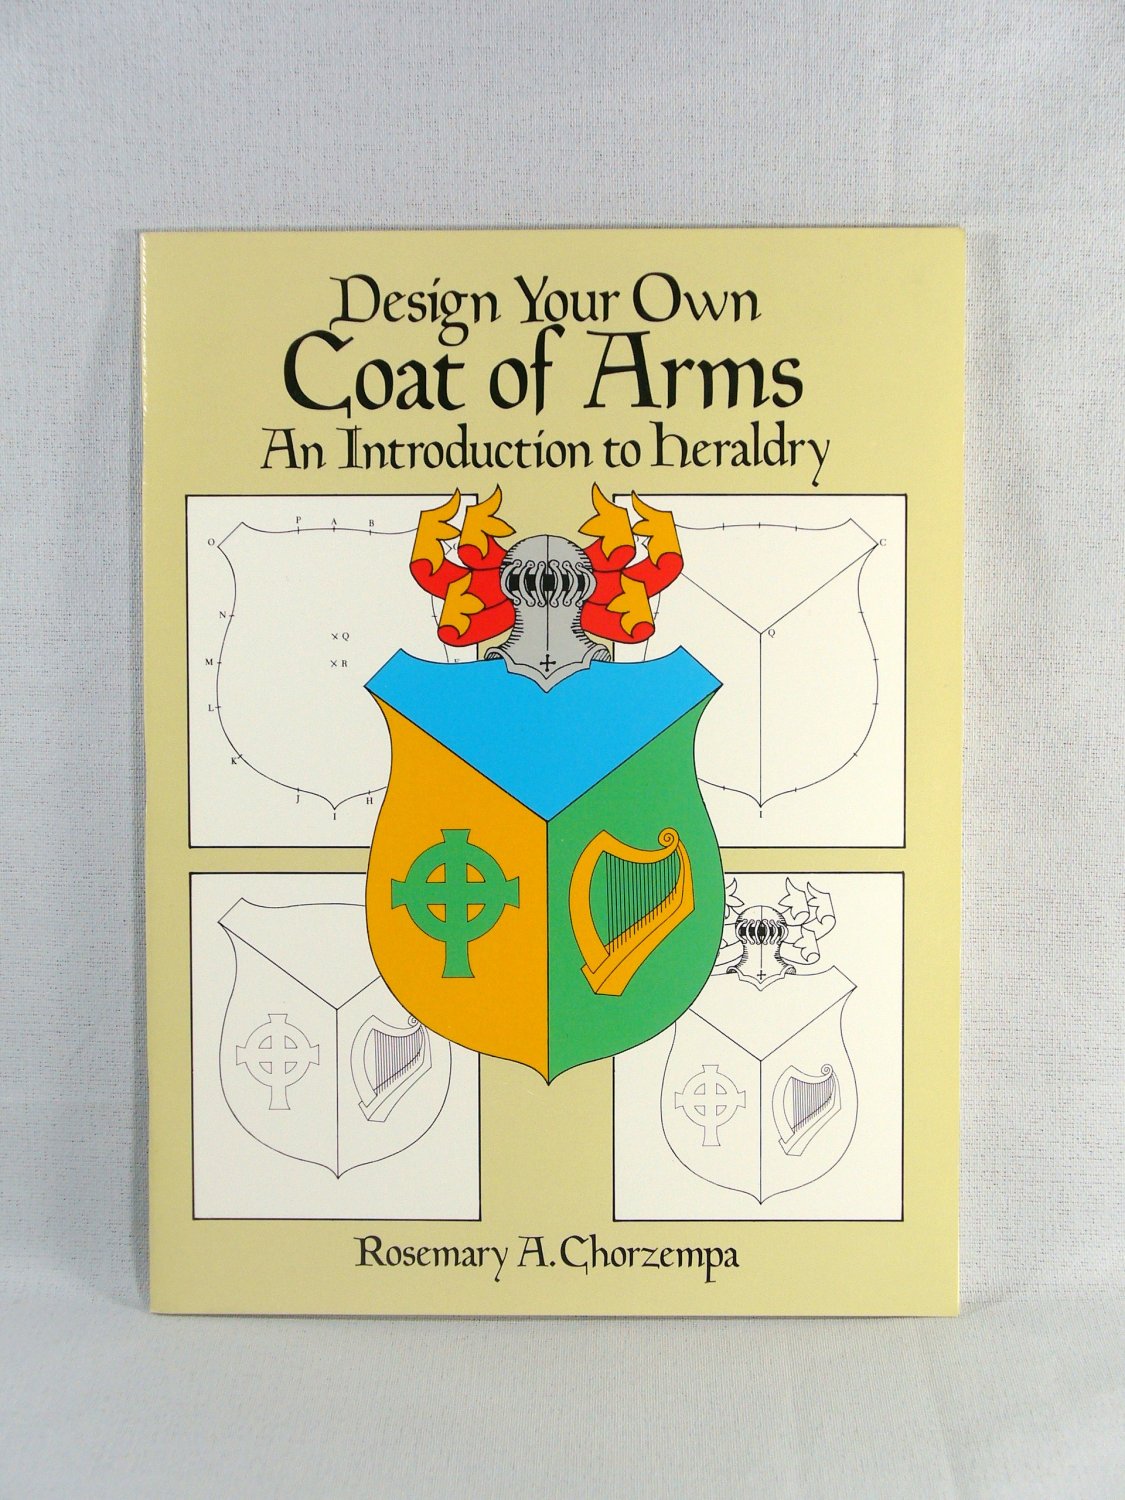 design-your-own-coat-of-arms-an-introduction-to-heraldry